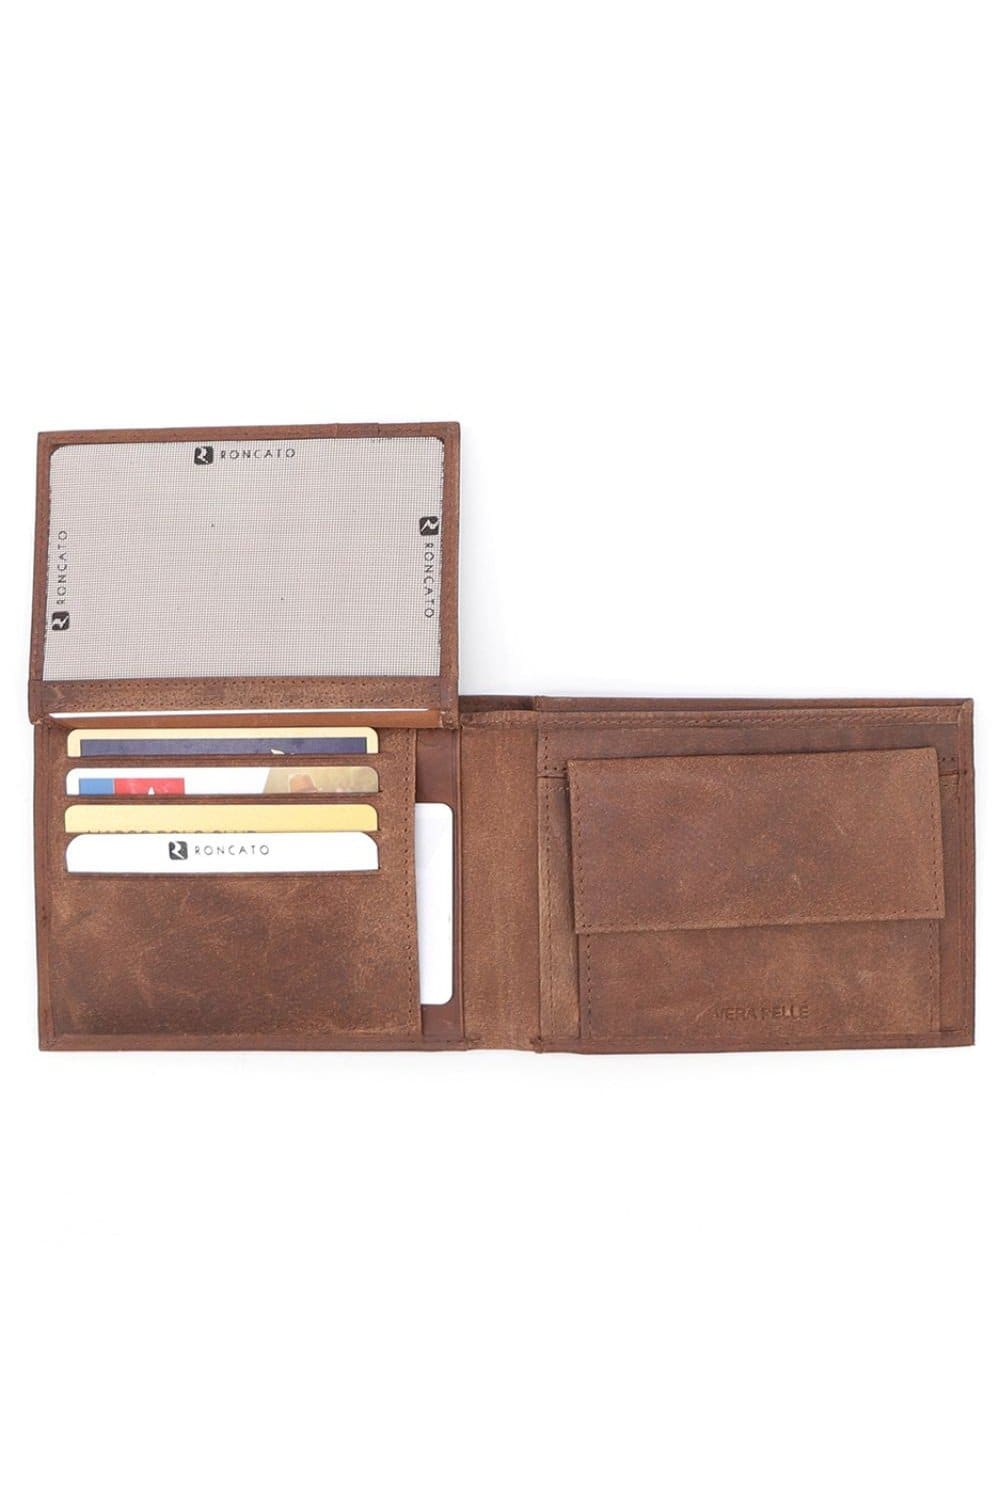 R. Roncato Men's Leather Wallet, Light Brown Fatio General Trading